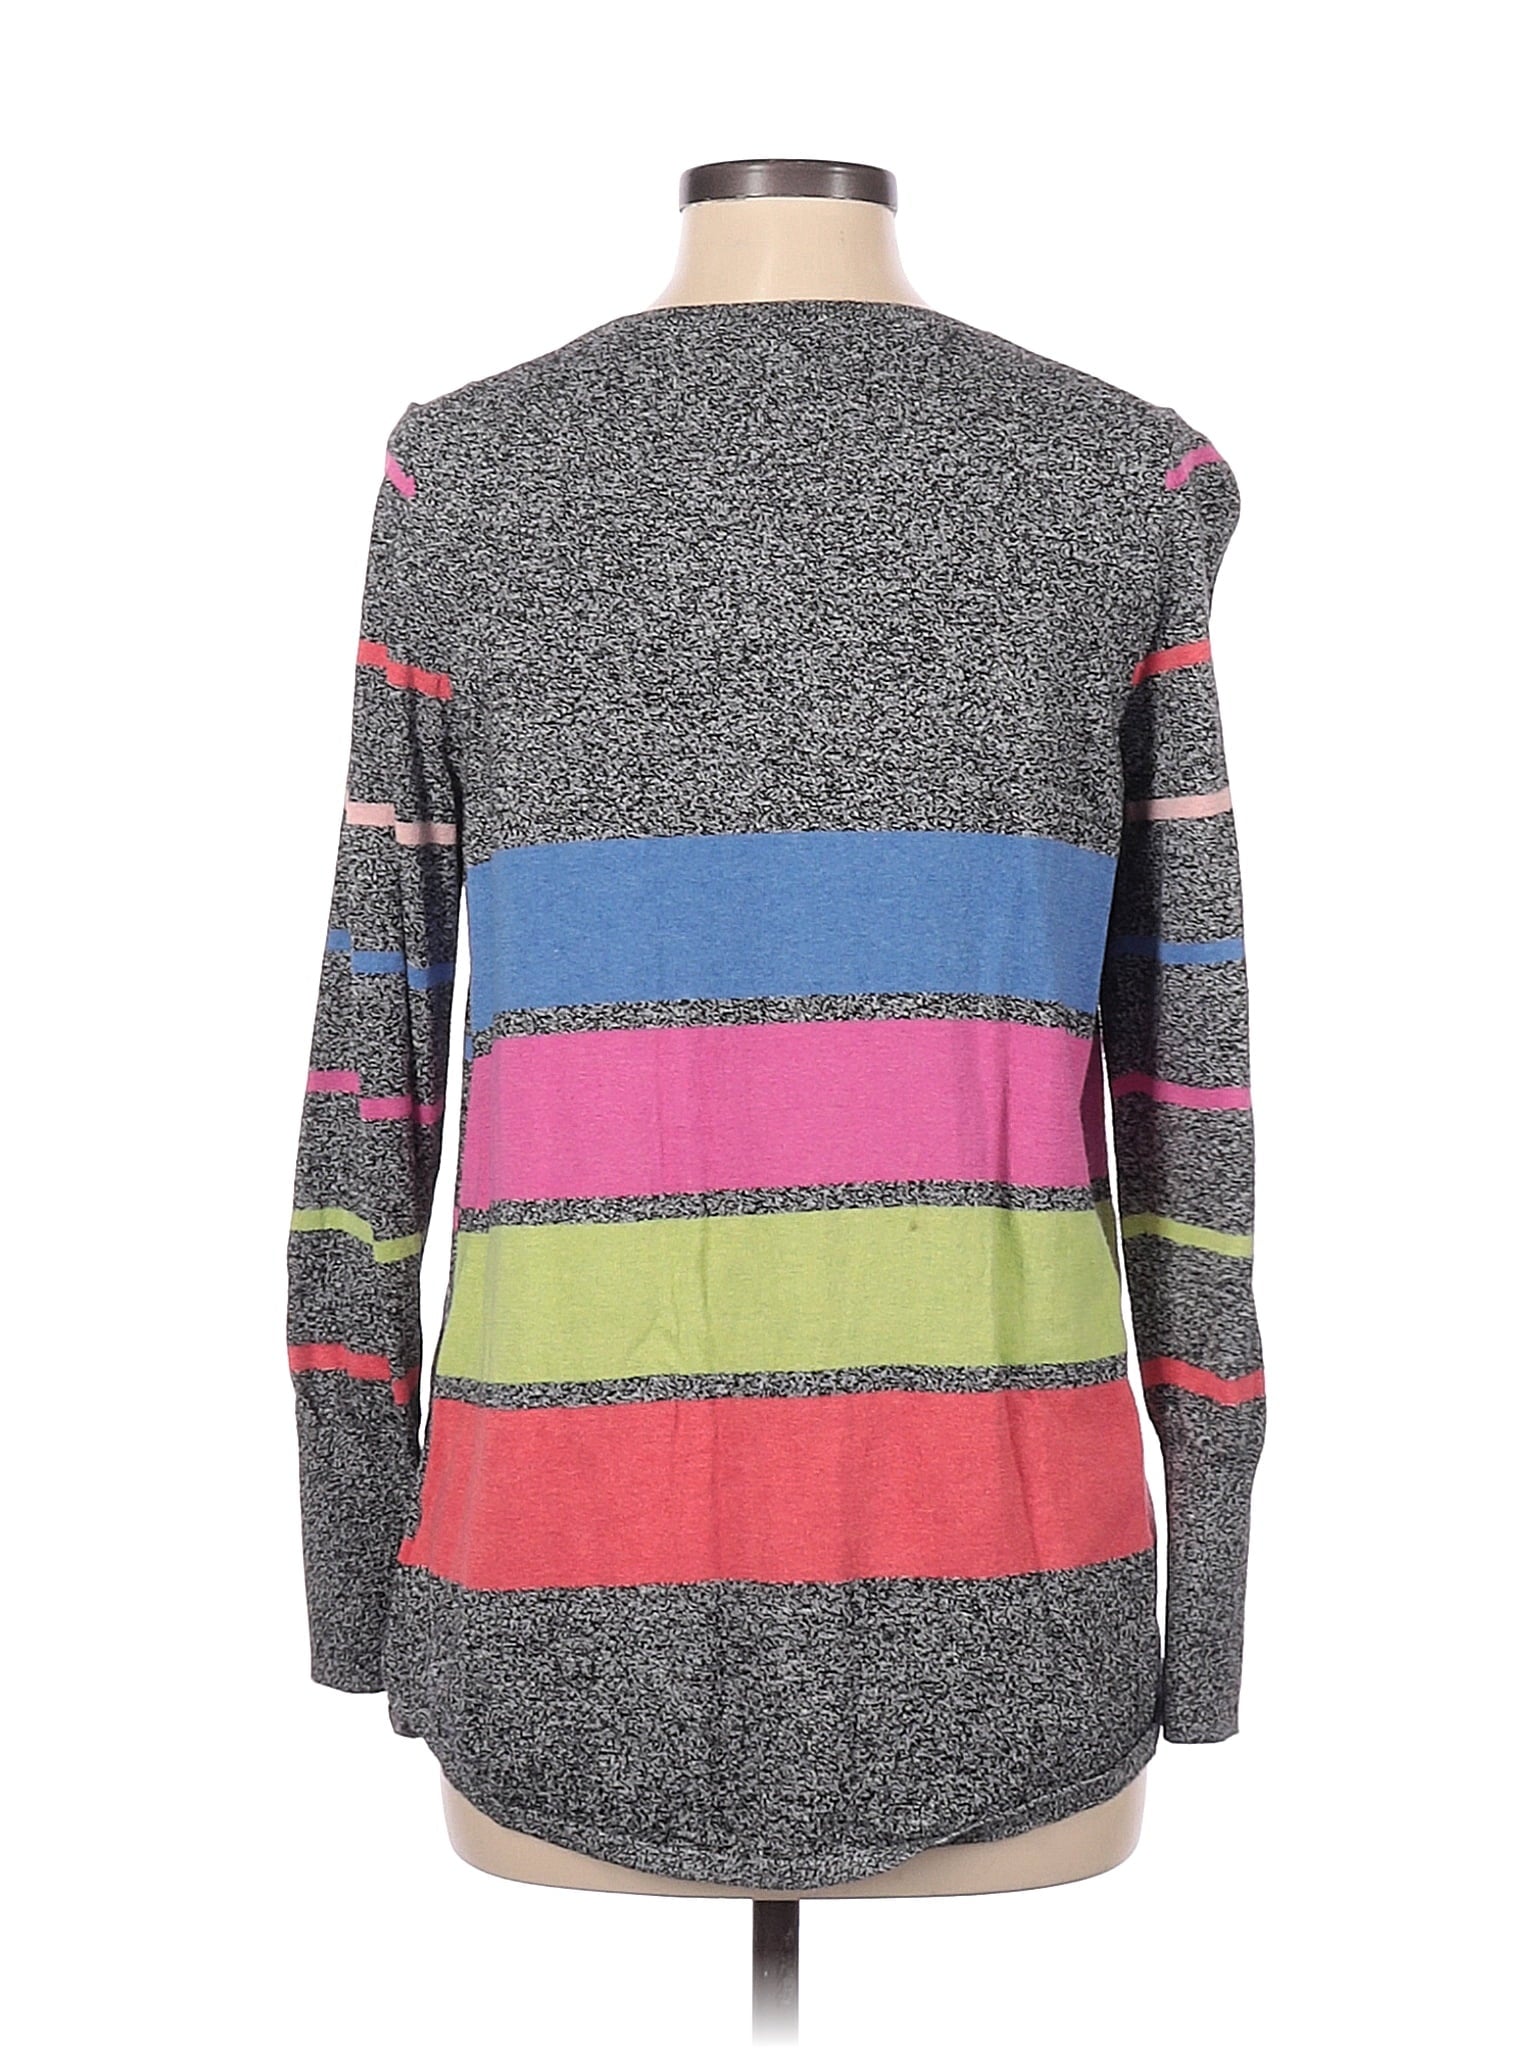 Pullover Sweater size - M